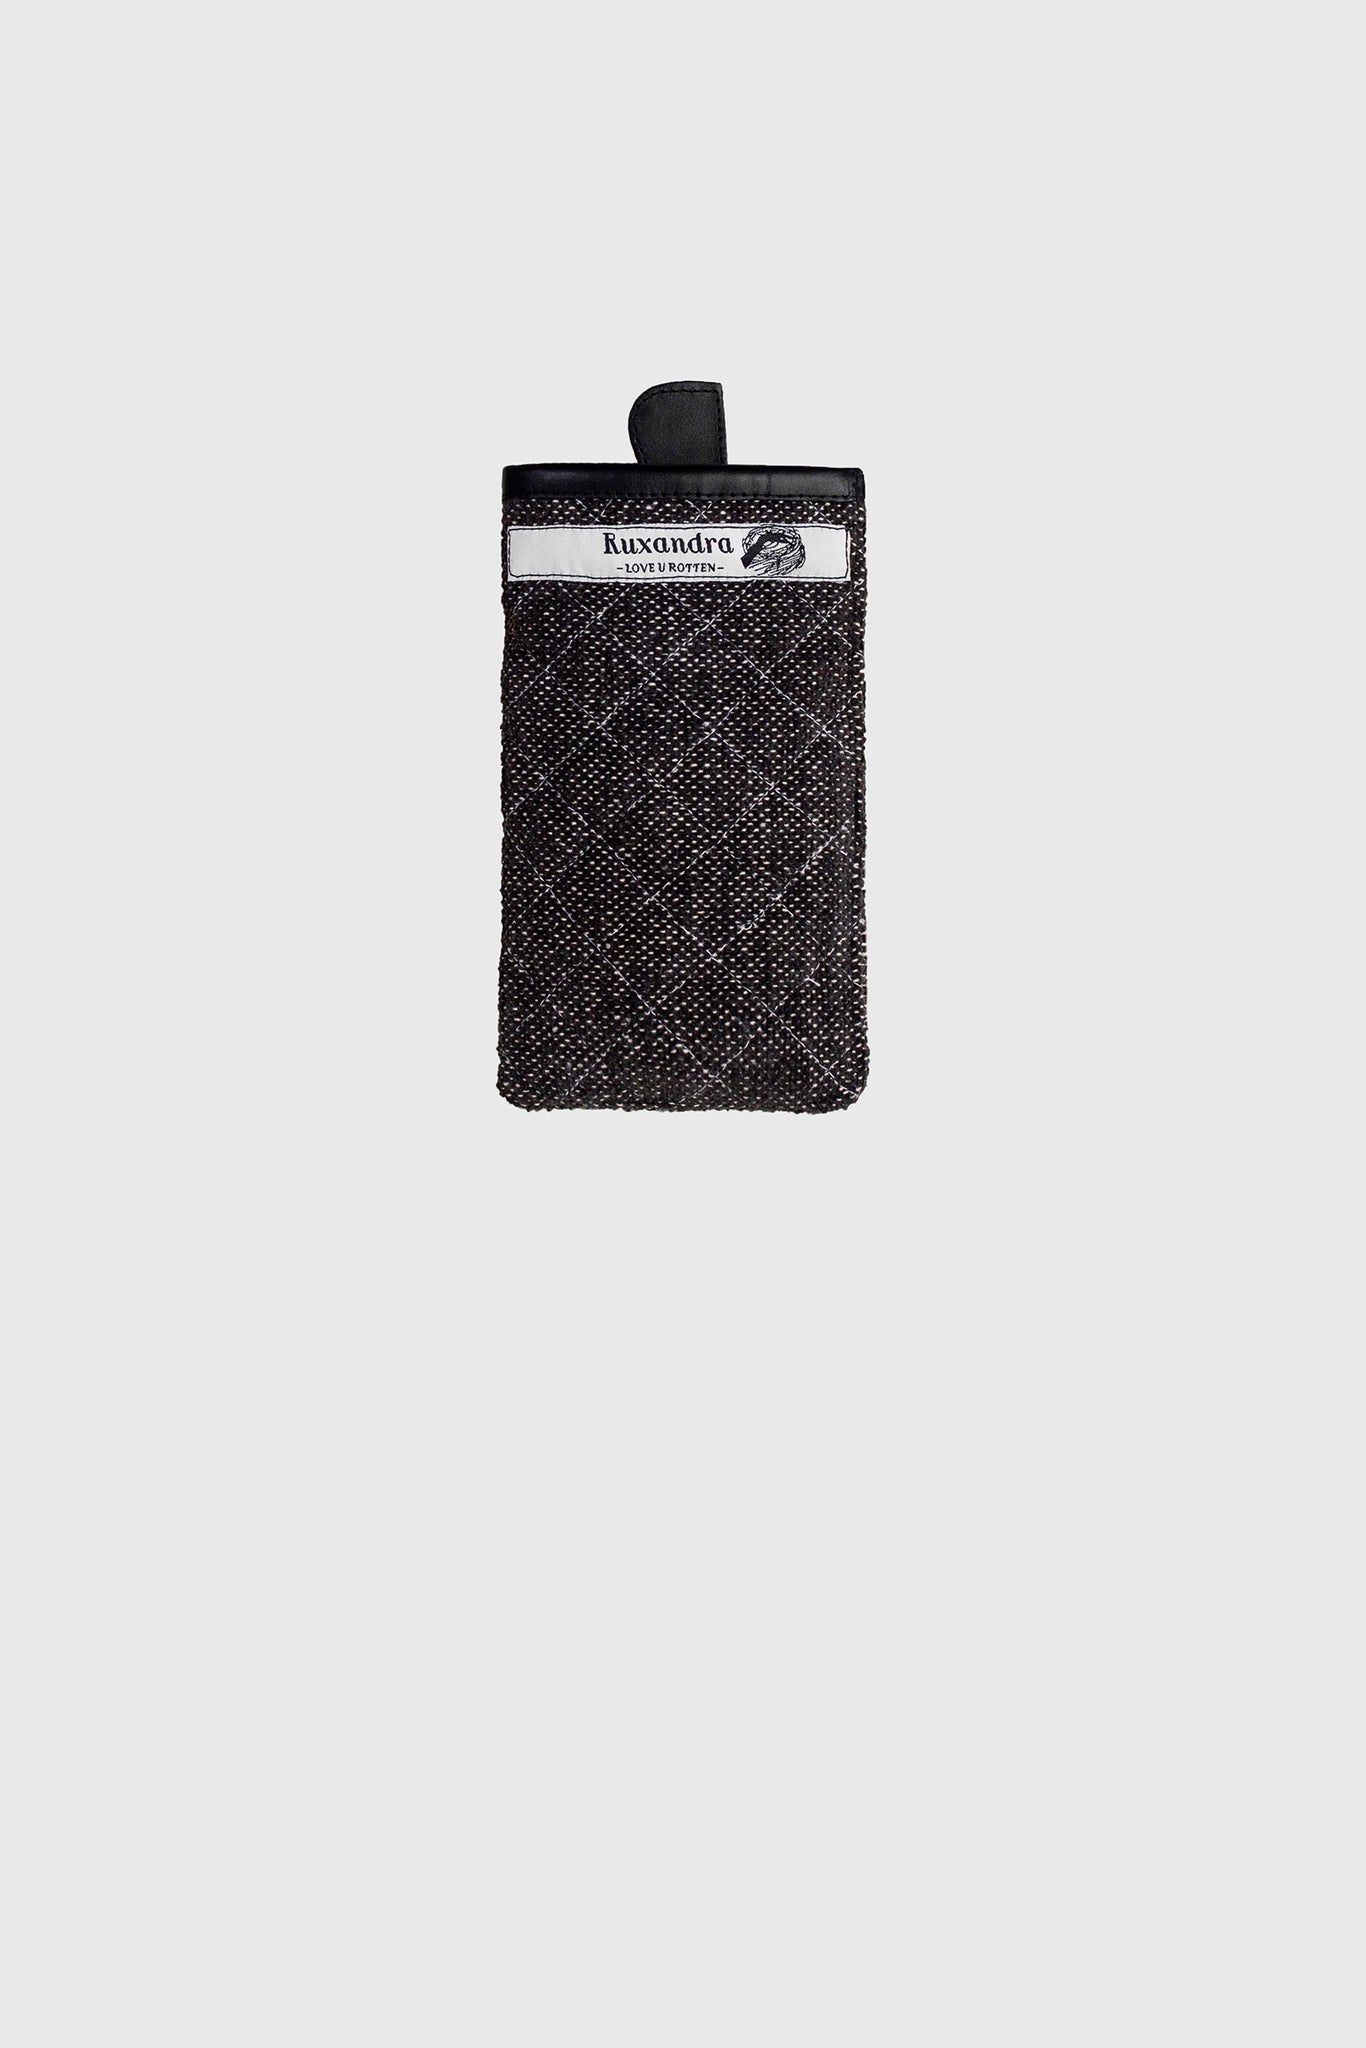 inexpensive but luxurious looking iphone case, made from cotton, shock absorbent,  rock texture, quilted style, leather details, for all models